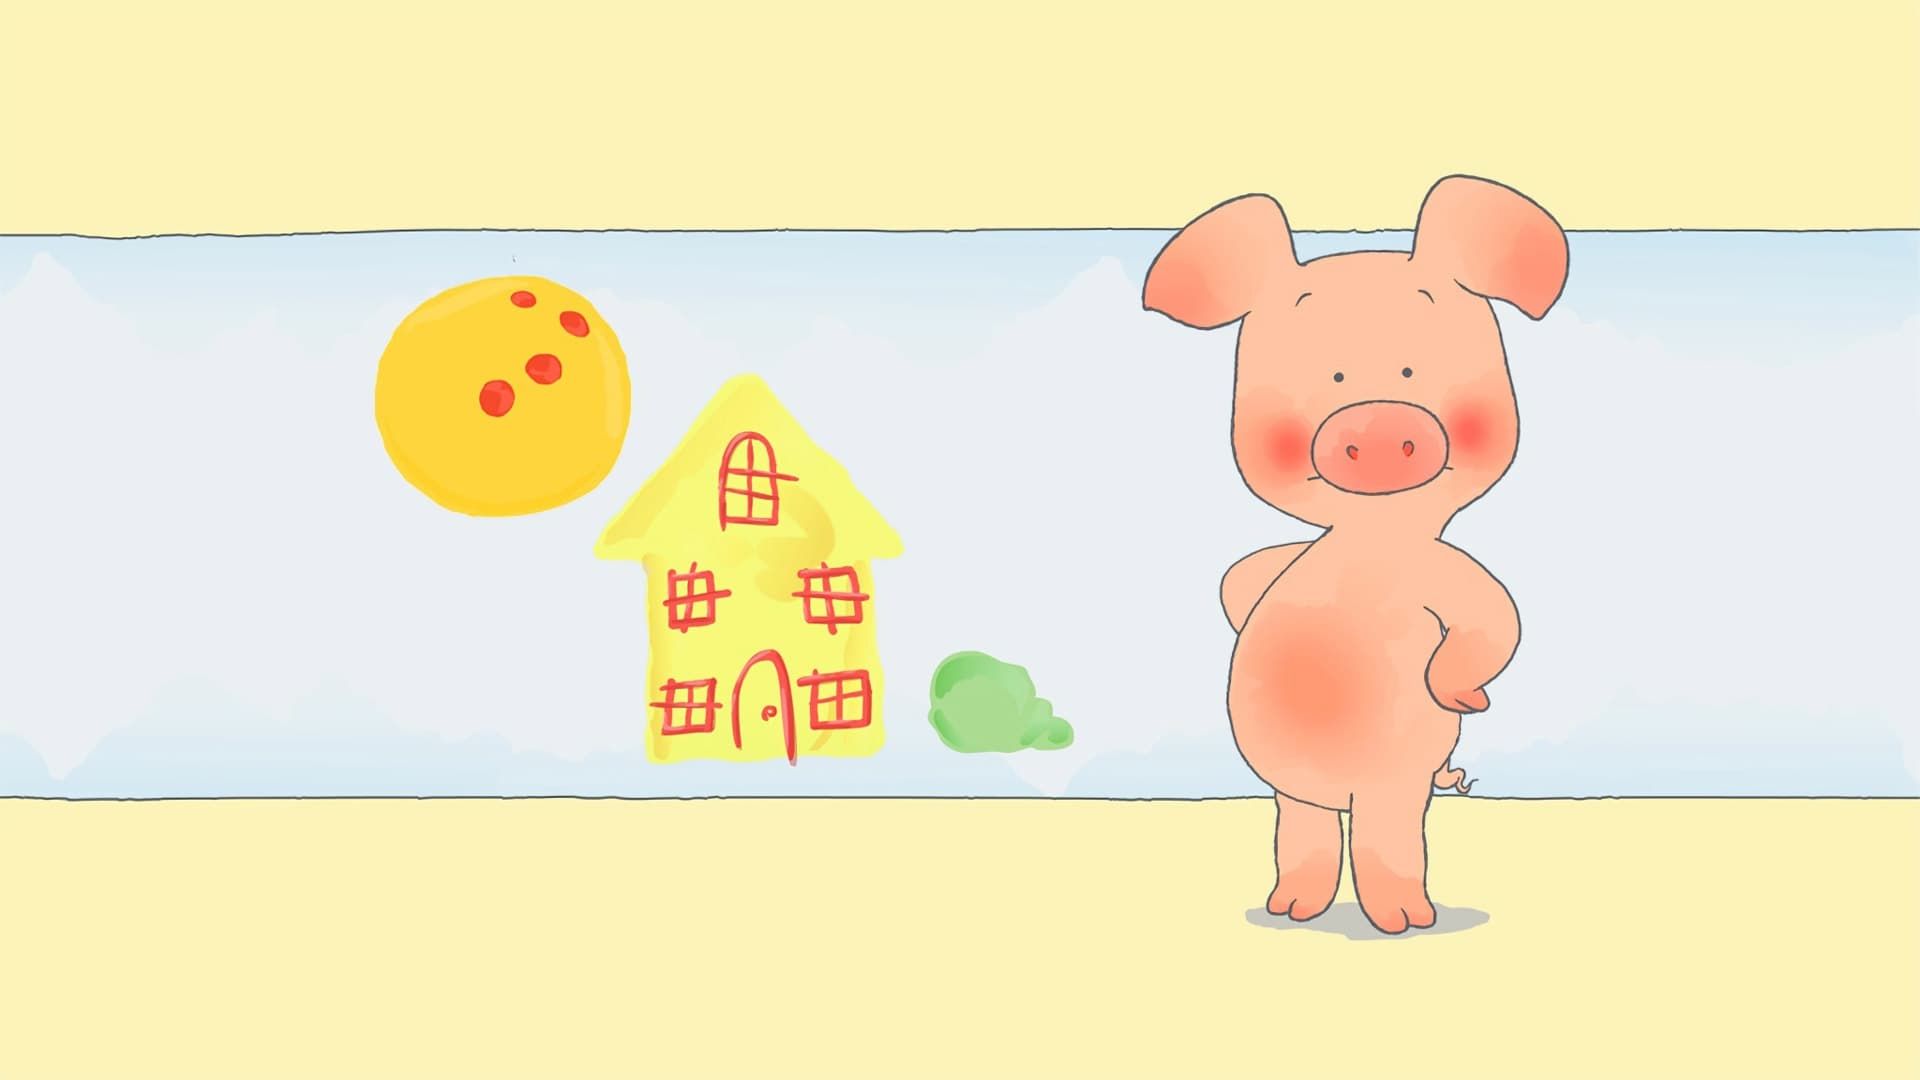 Wibbly Pig background